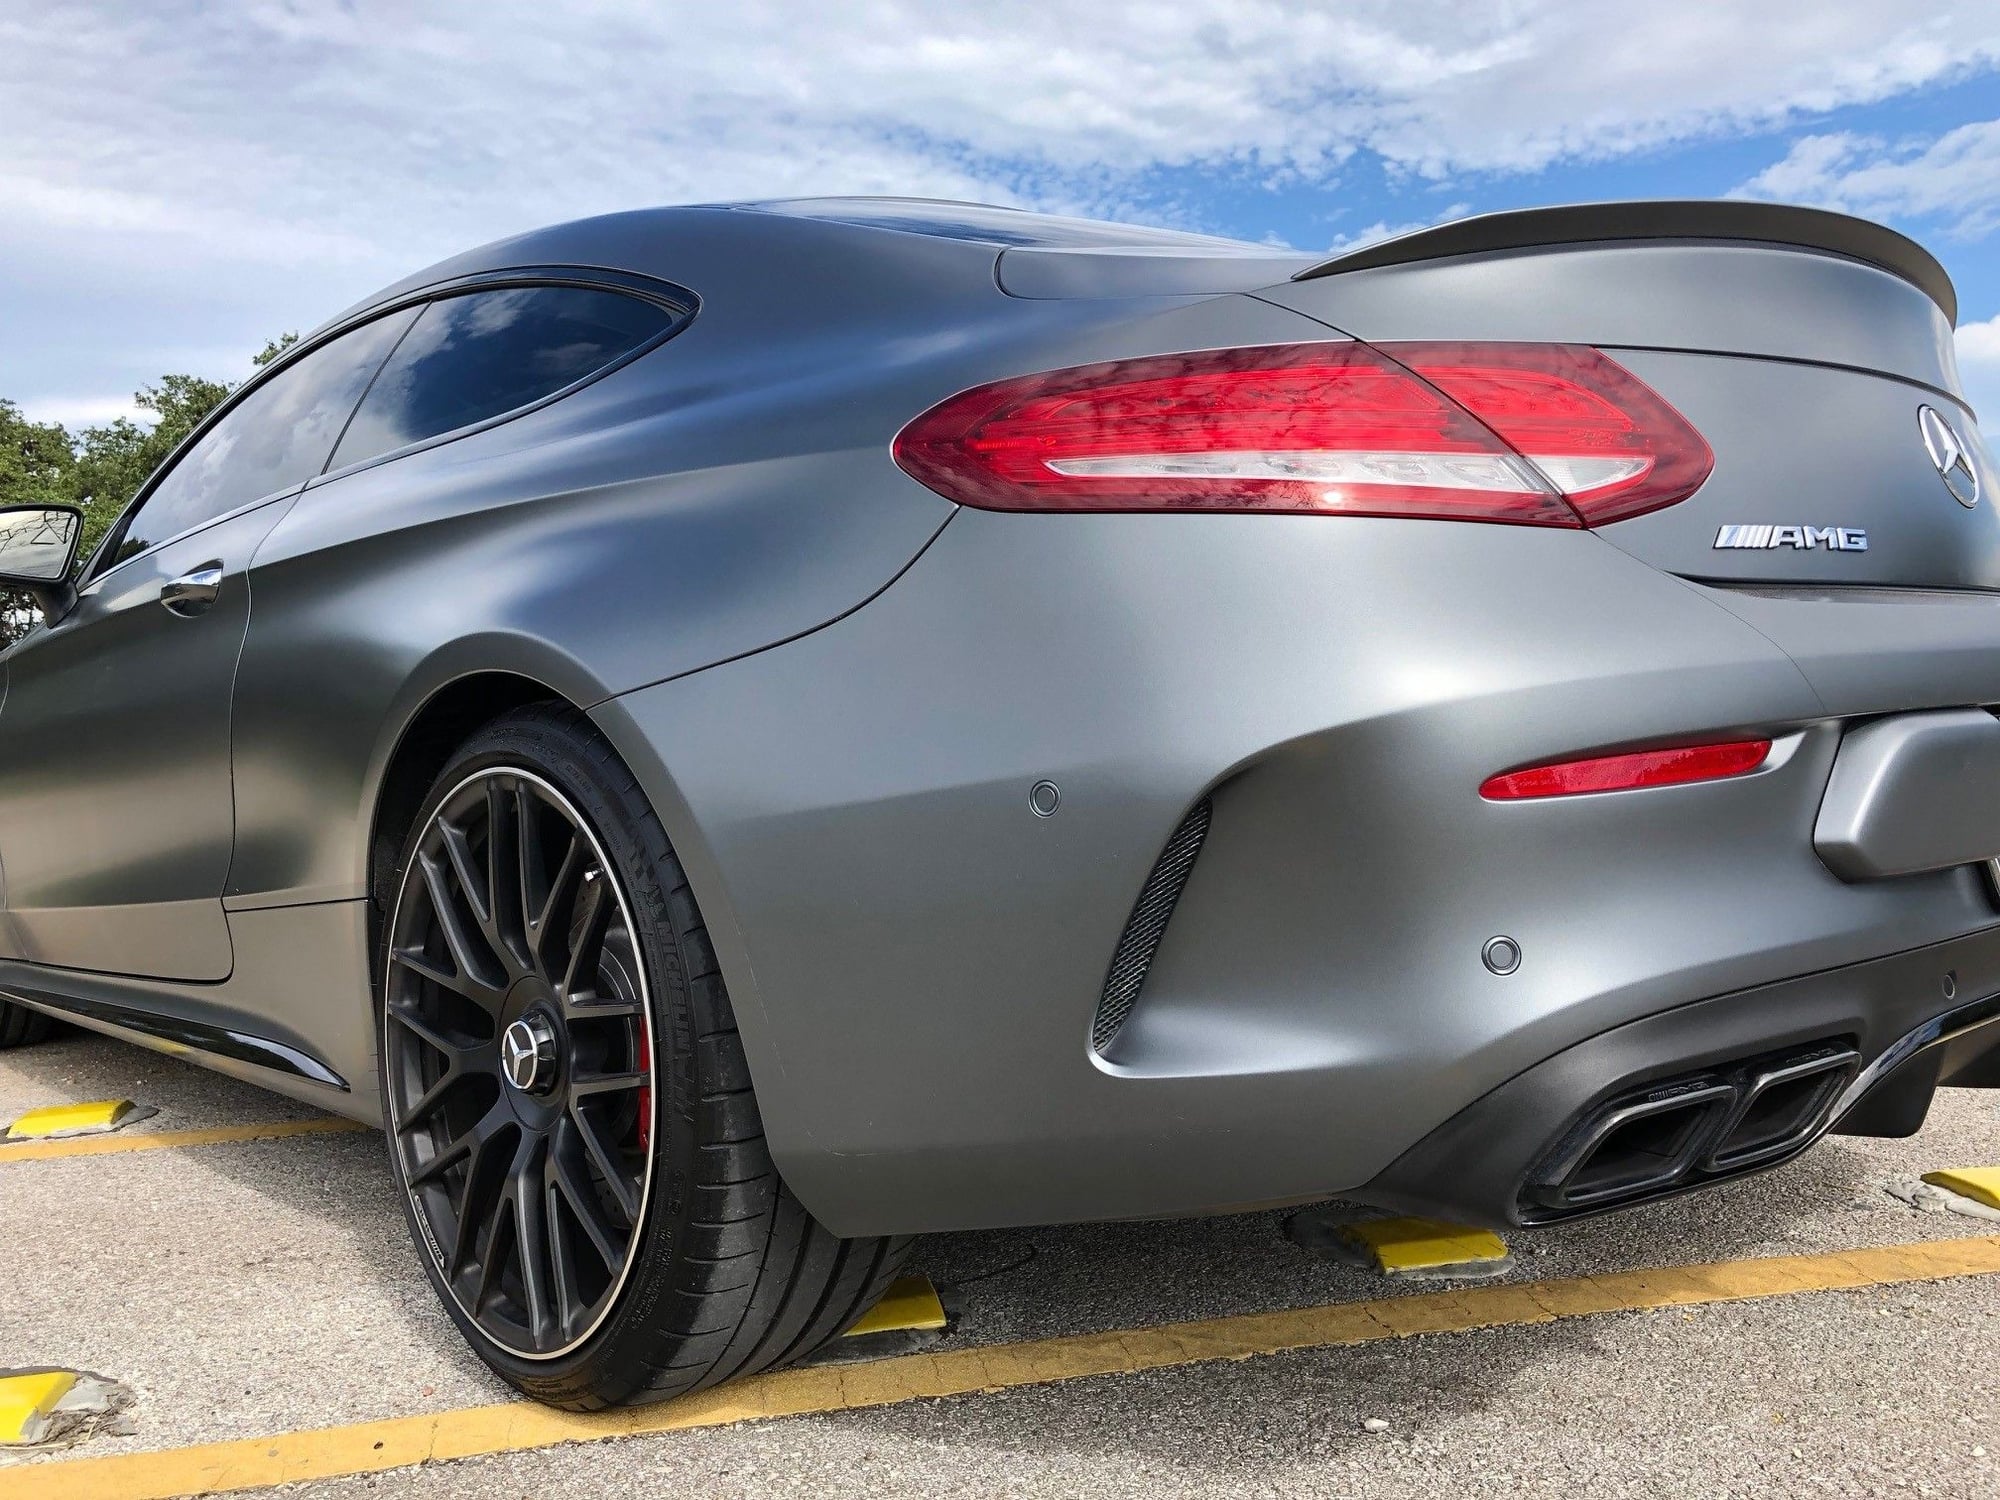 2018 Mercedes Benz C63 S AMG Grey Magno Coupe $5k in XPEL PPF Tint ...